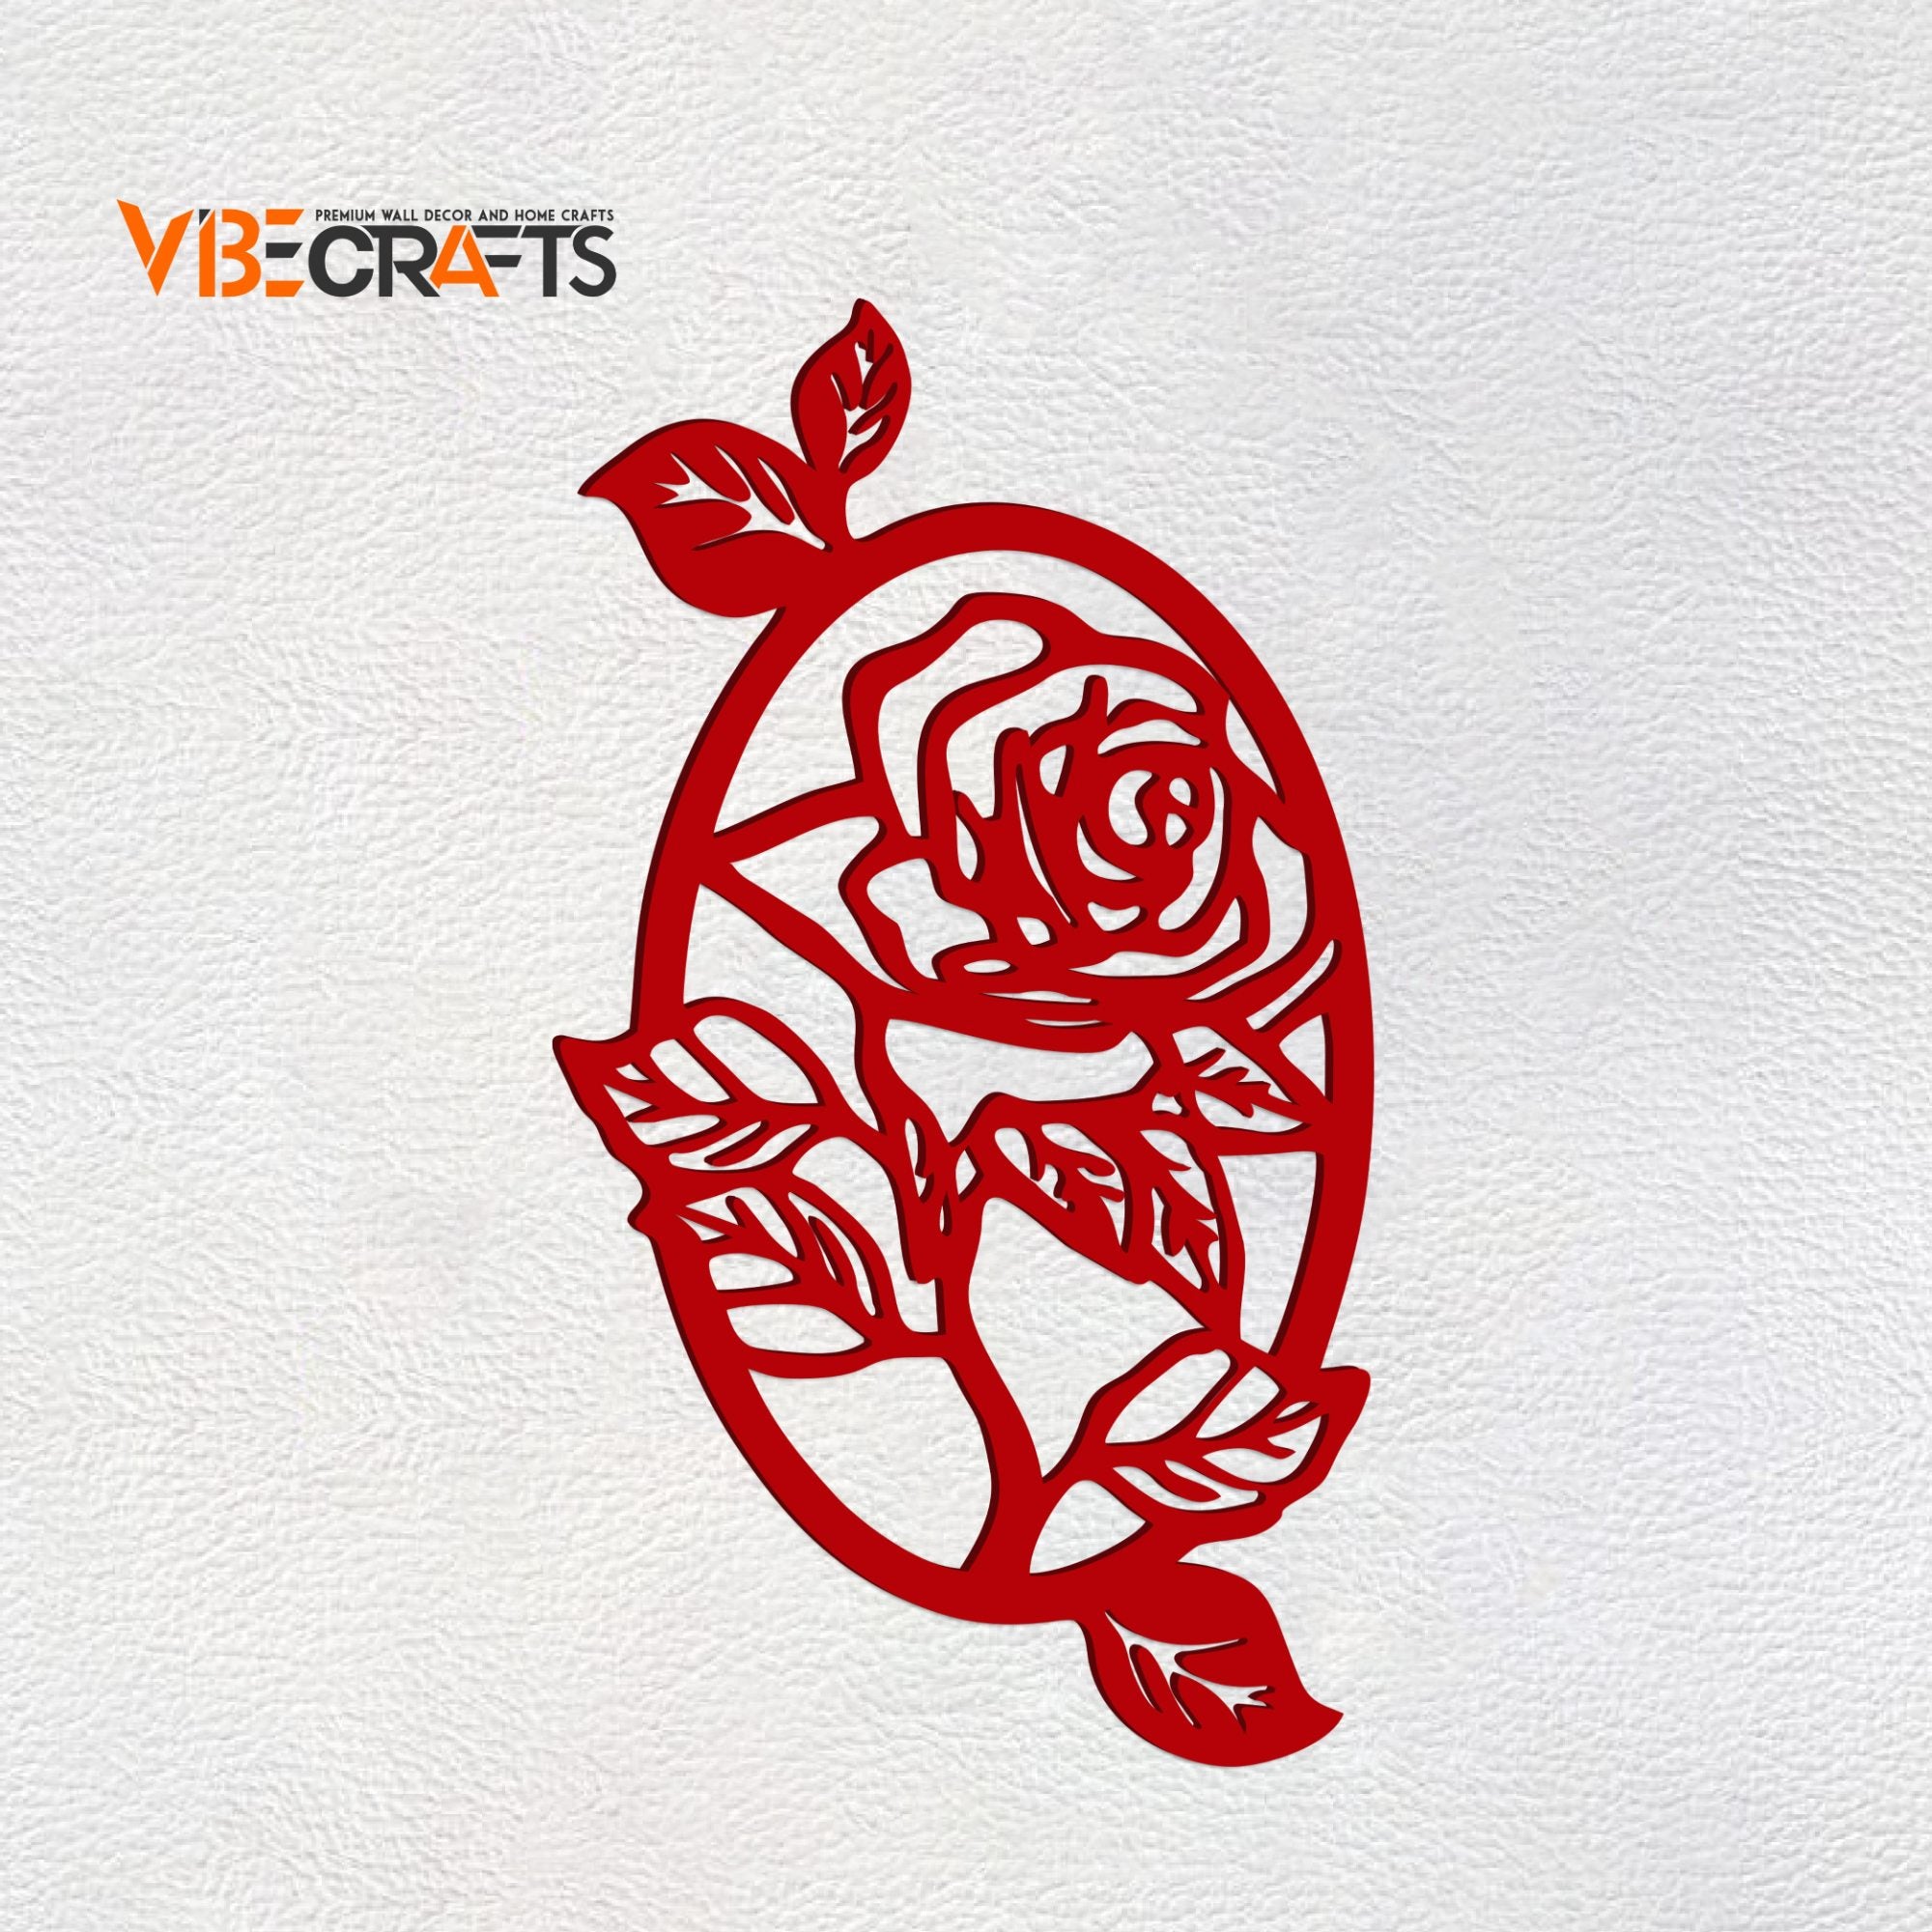 Beautiful Red Rose in Oval Shape Design Premium Quality Wooden Wall Hanging